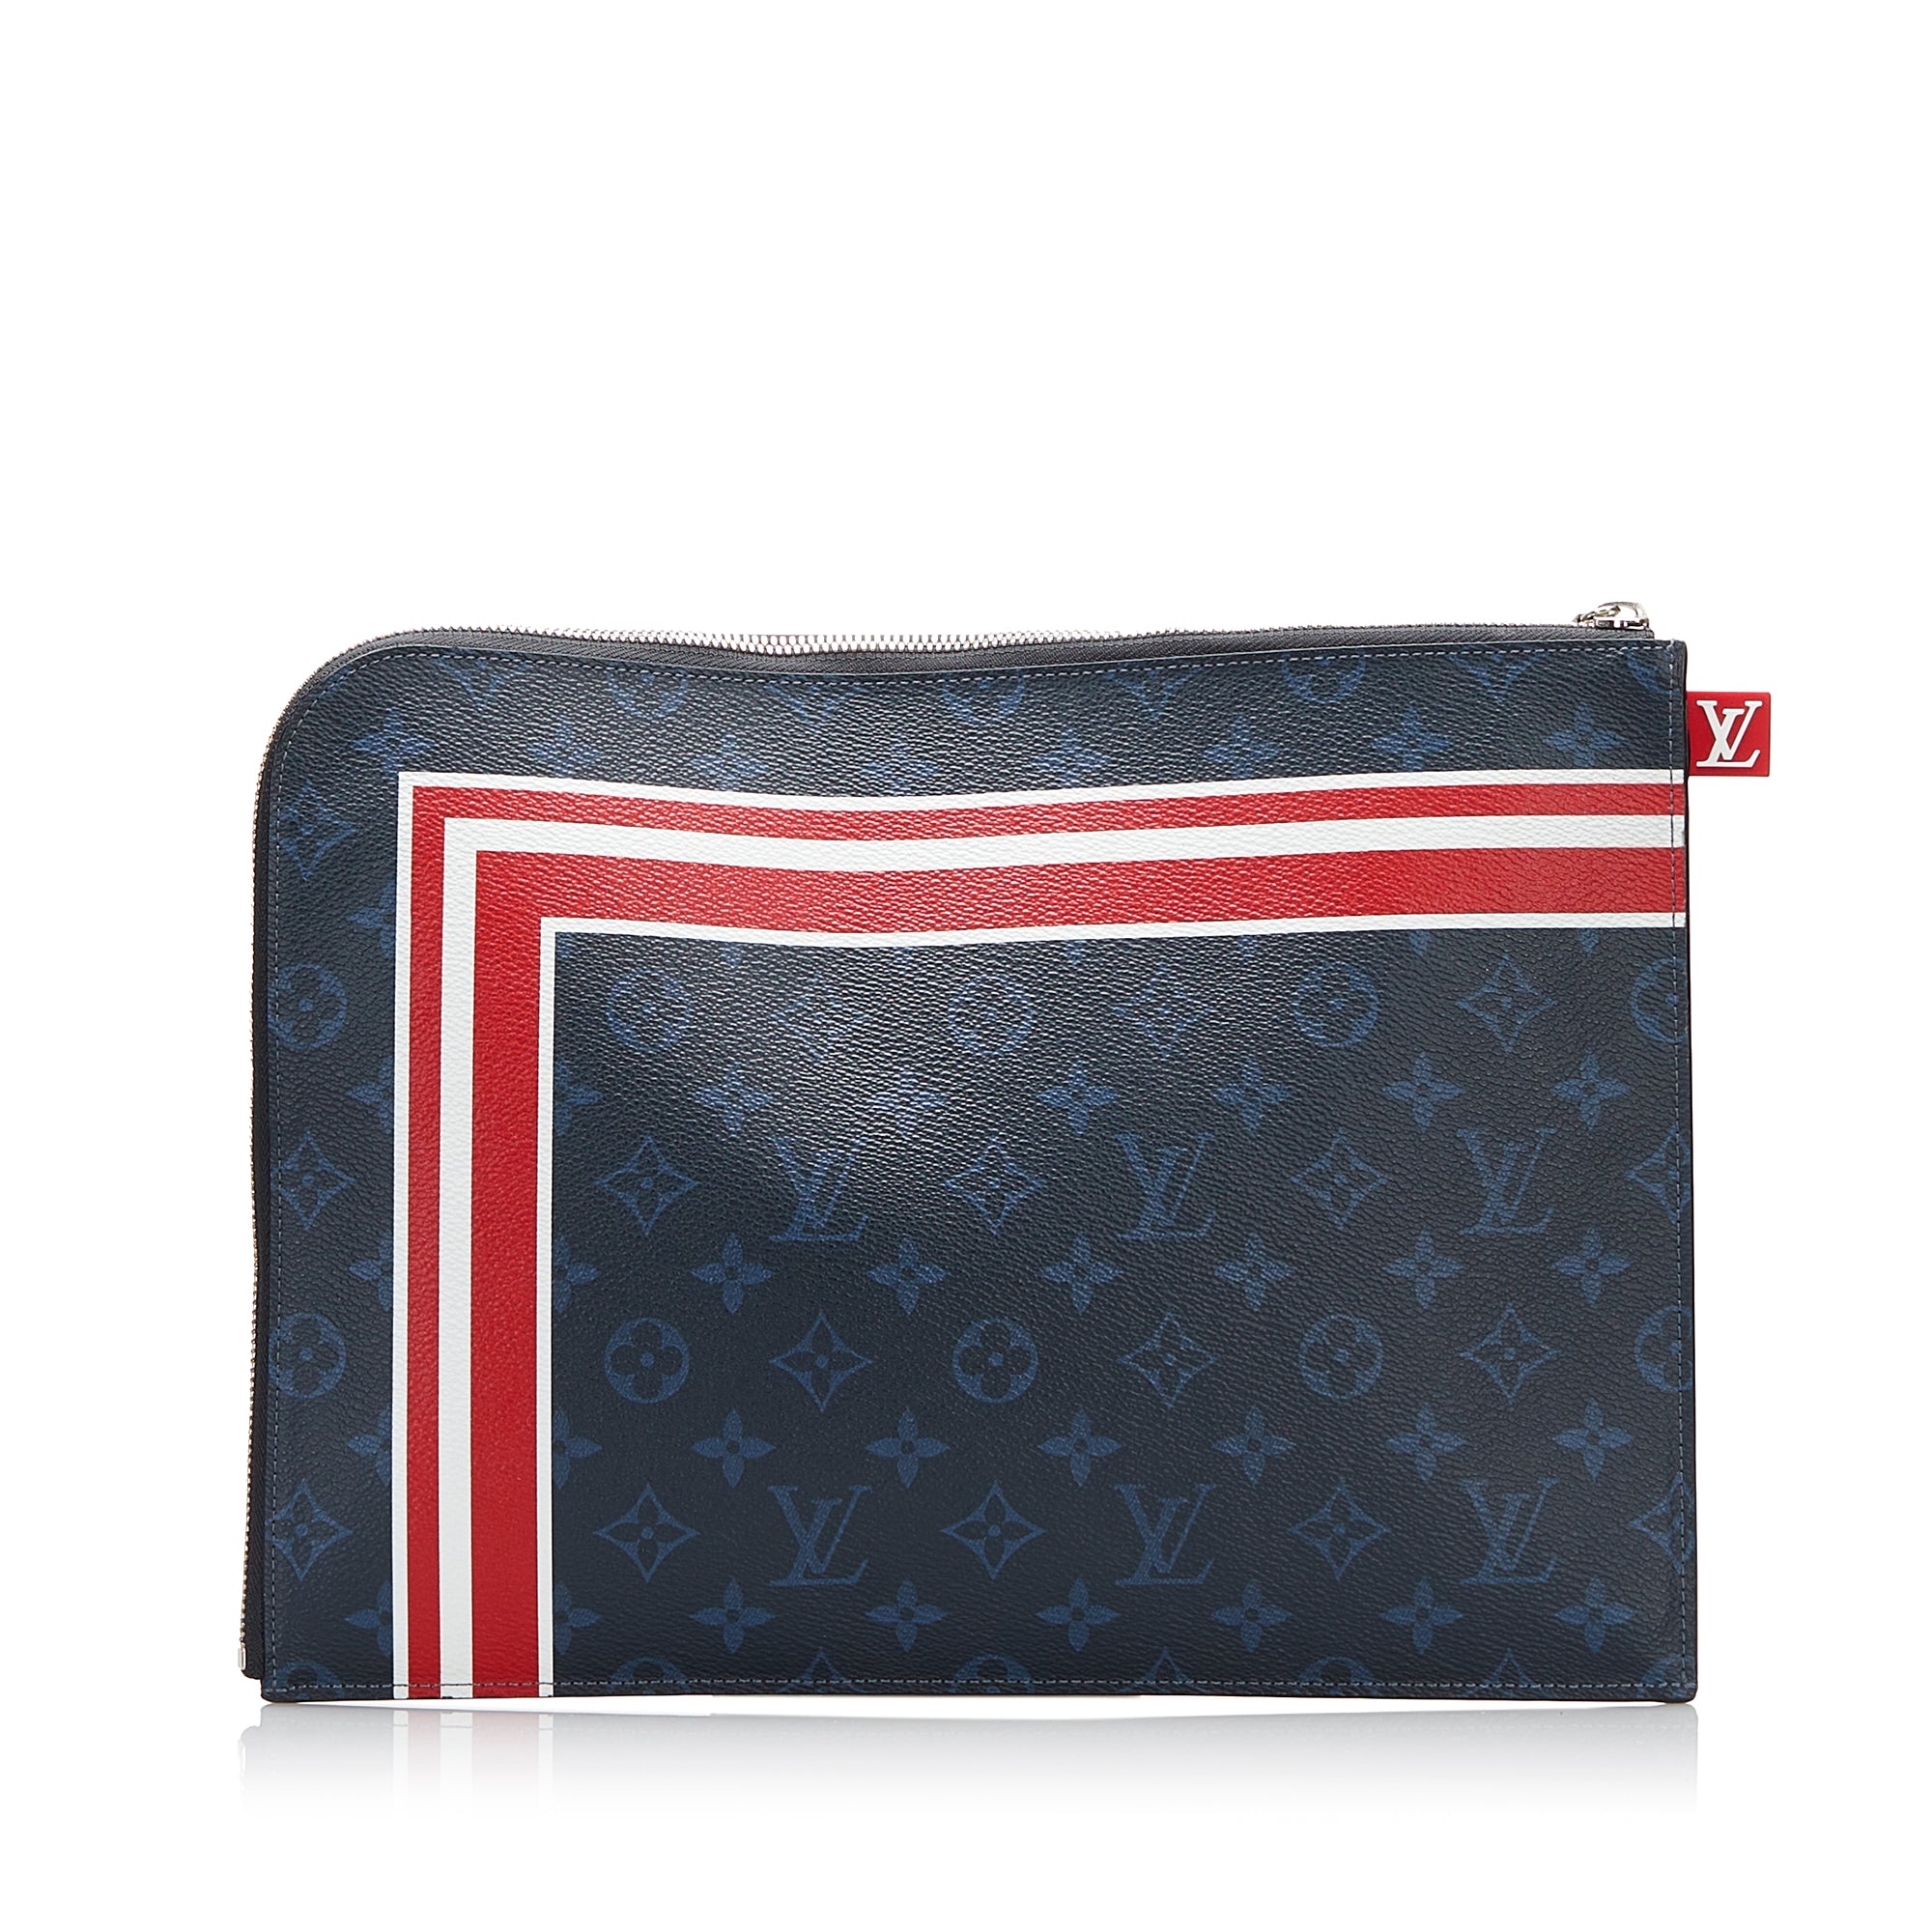 Louis Vuitton Pochette Jour small model pouch in blue grained leather